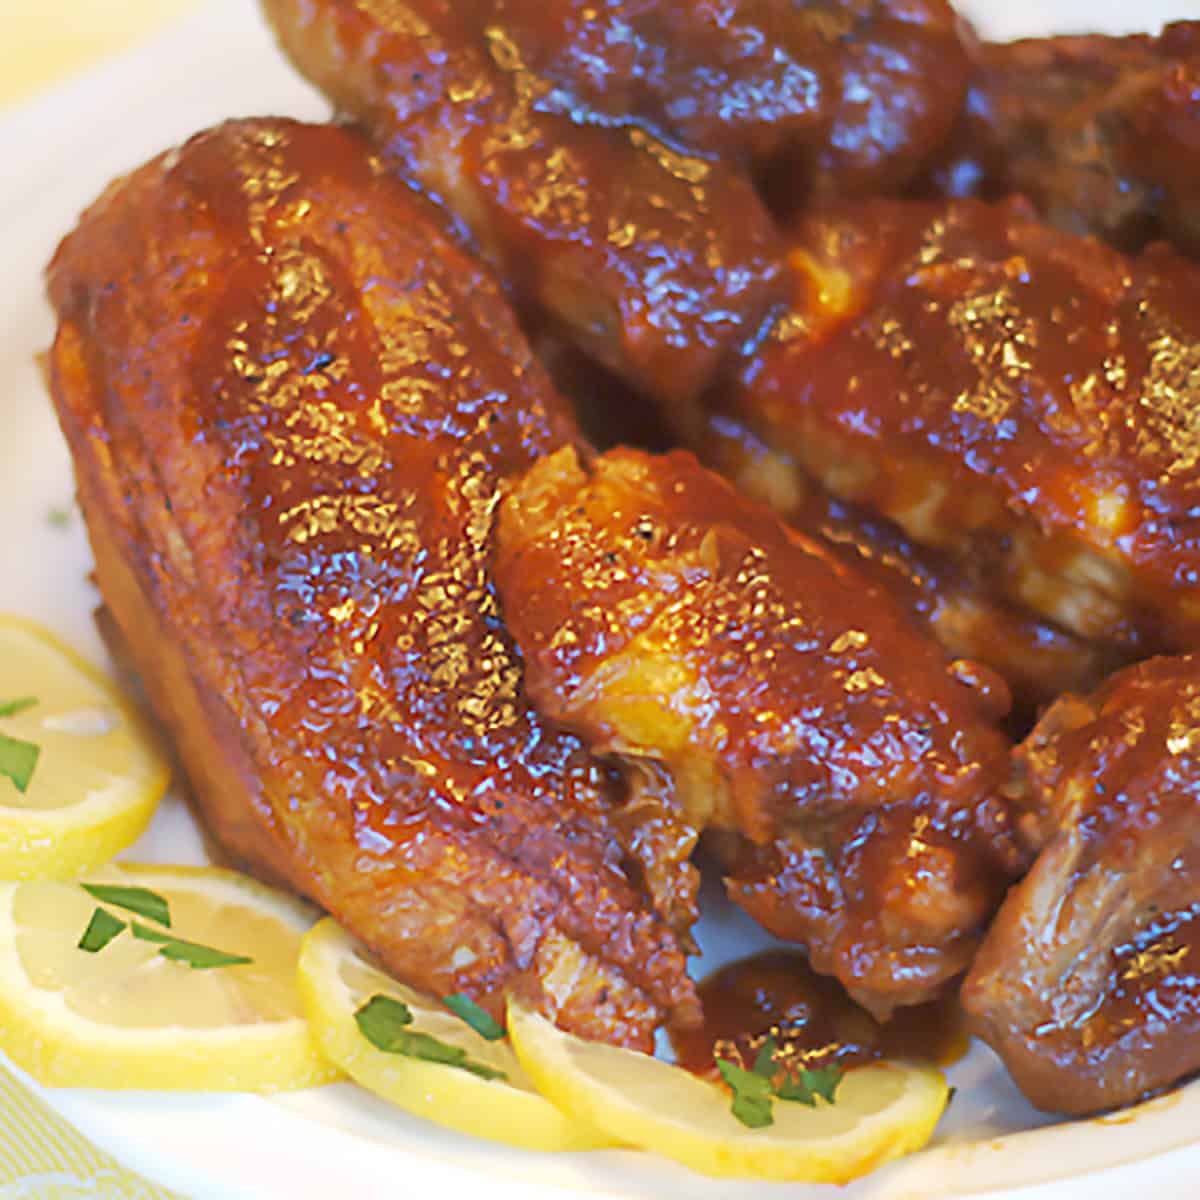 Smothered barbecued chicken with lemons on a white plate.